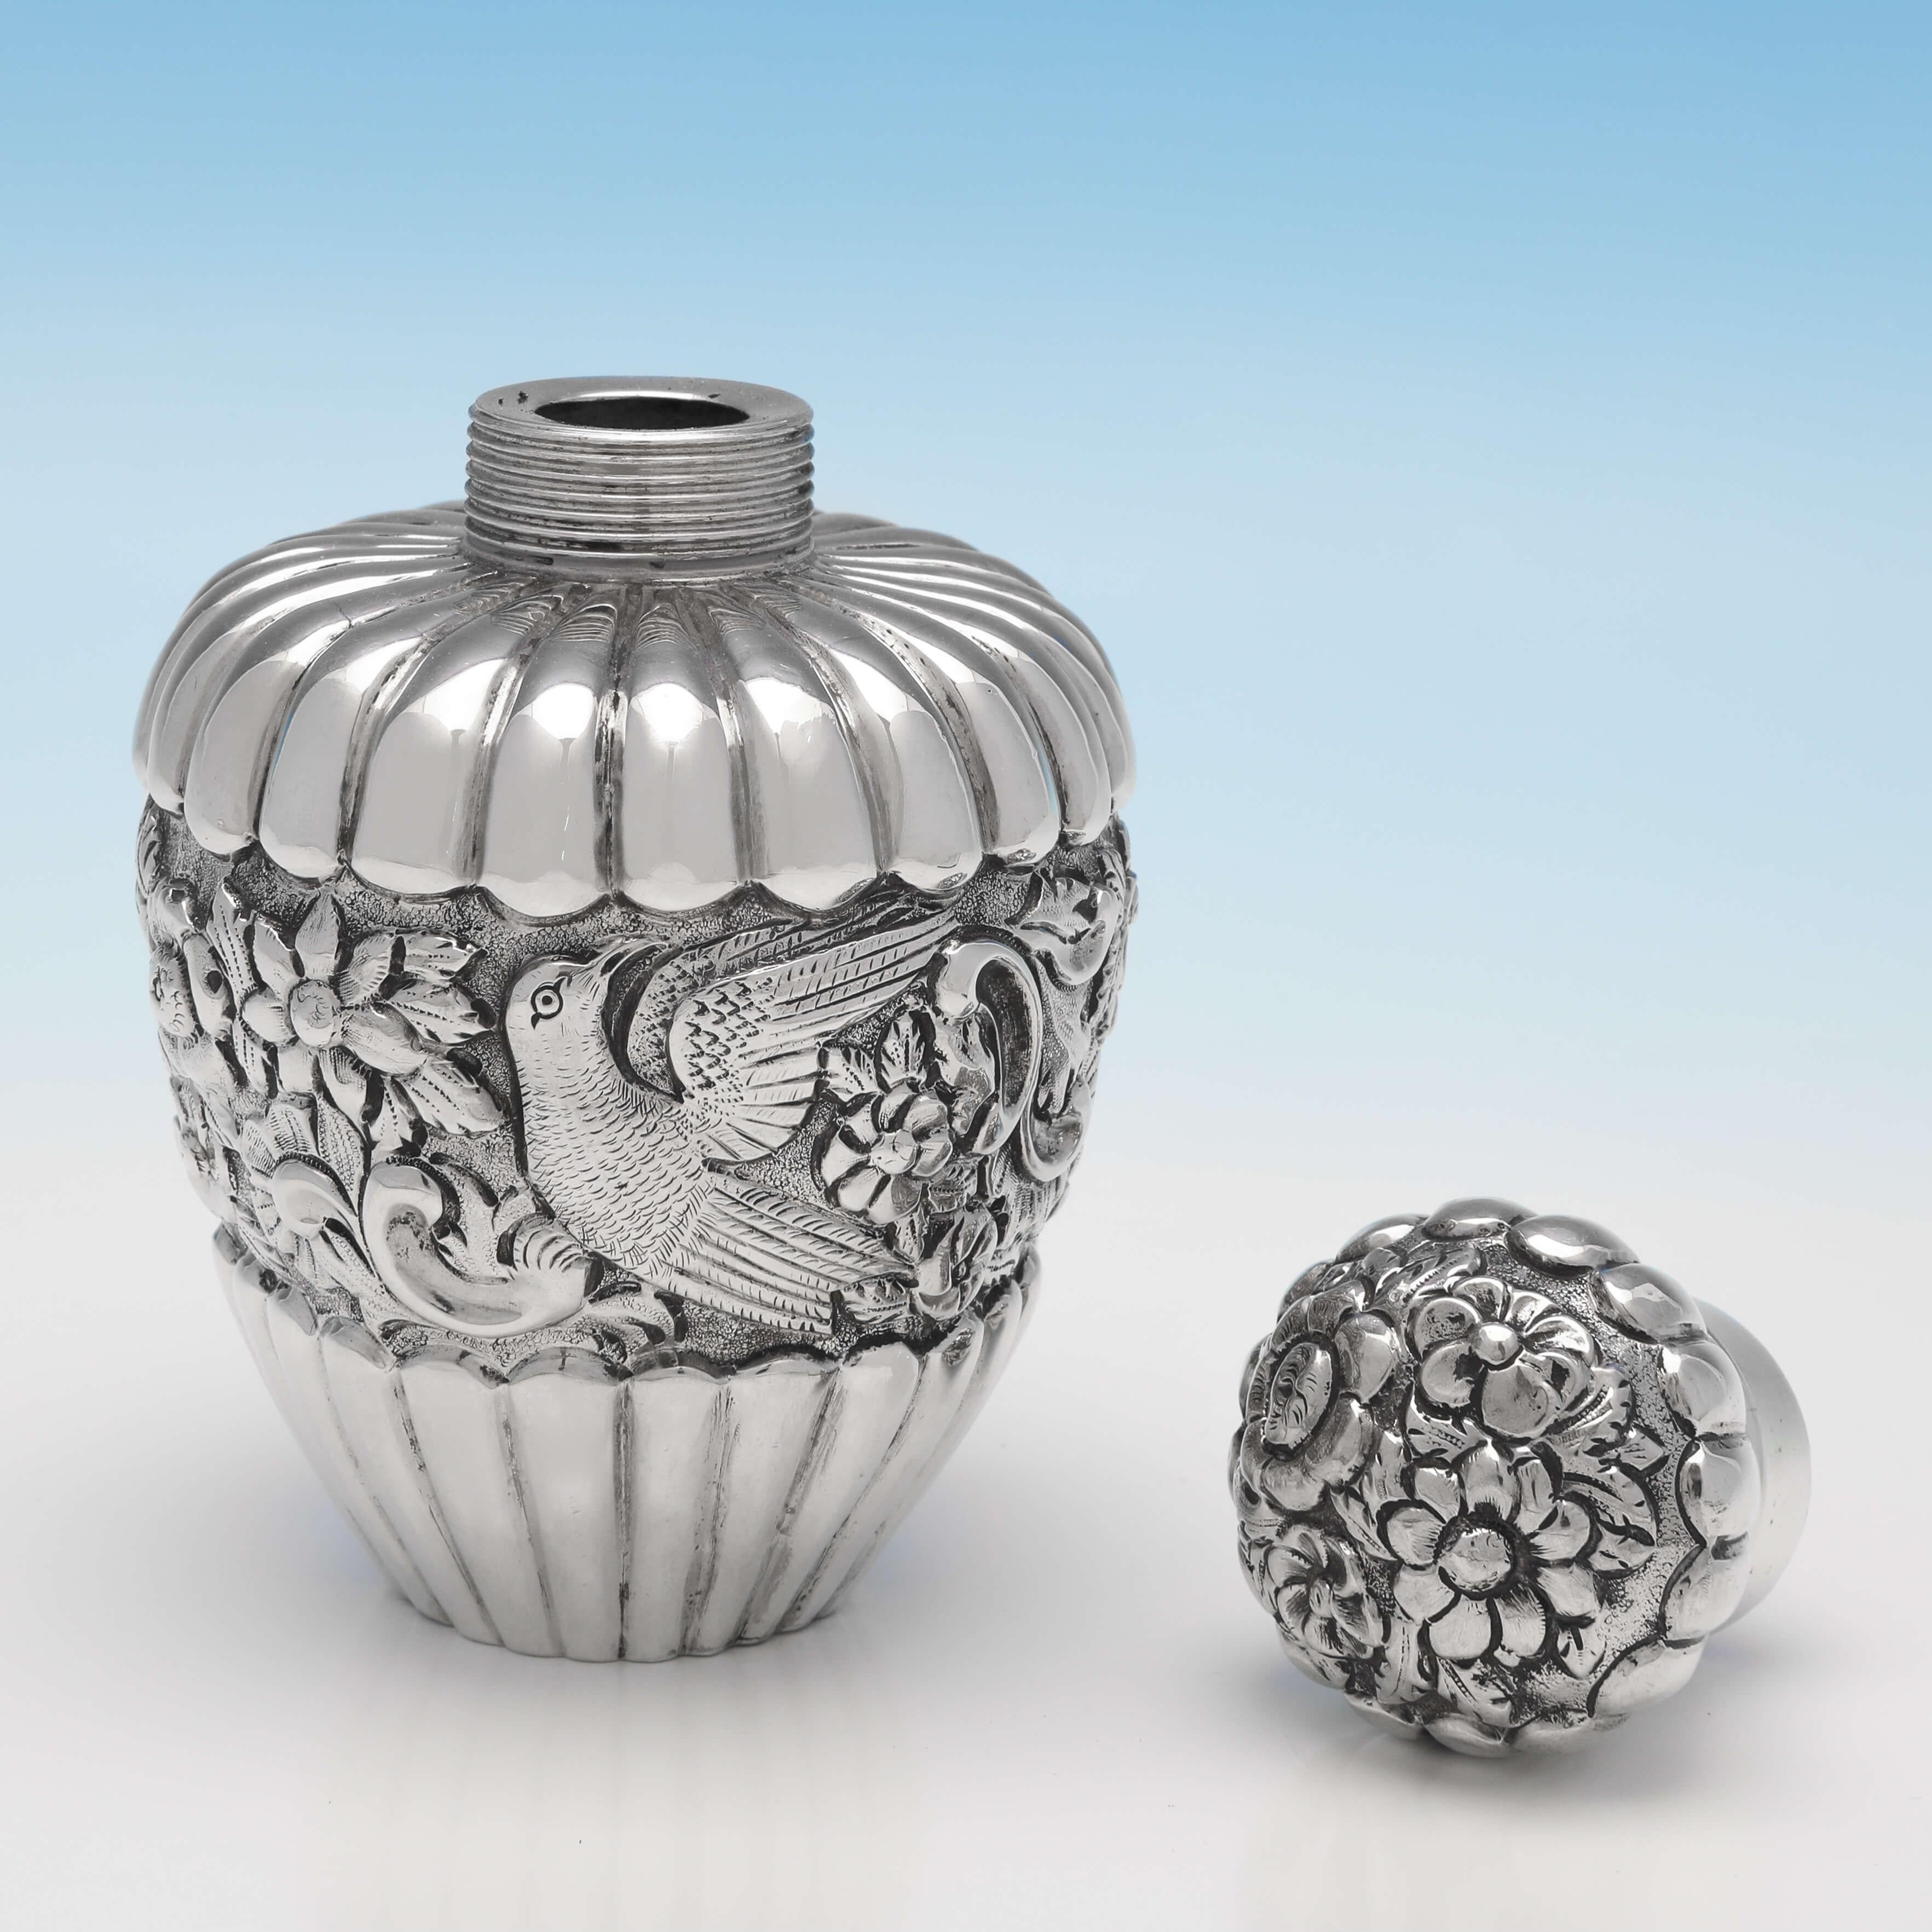 Hallmarked in Edinburgh in 1888 by Marshall & Sons, this very attractive, Antique Sterling Silver Scent Bottle, is ornate in design, featuring a chased band of decoration around the body and lid, and fluted detailing. The scent bottle measures